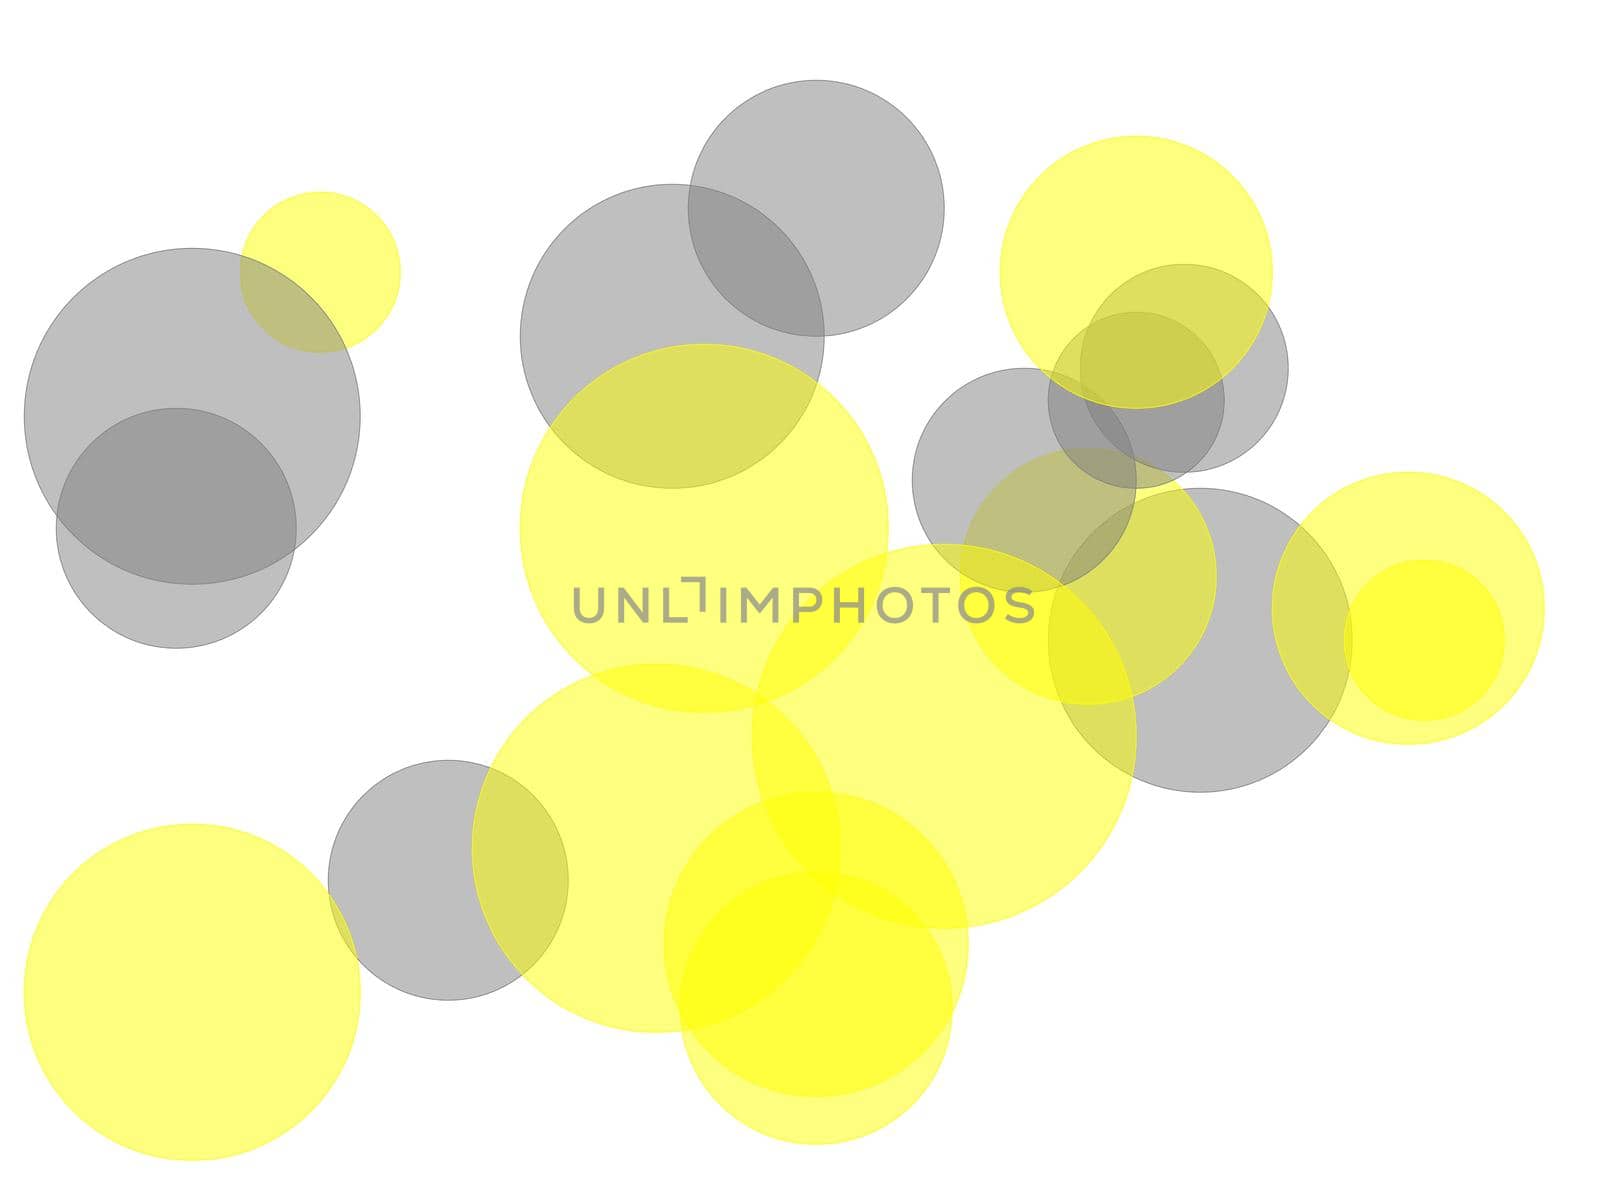 Abstract minimalist grey yellow illustration with circles and white background